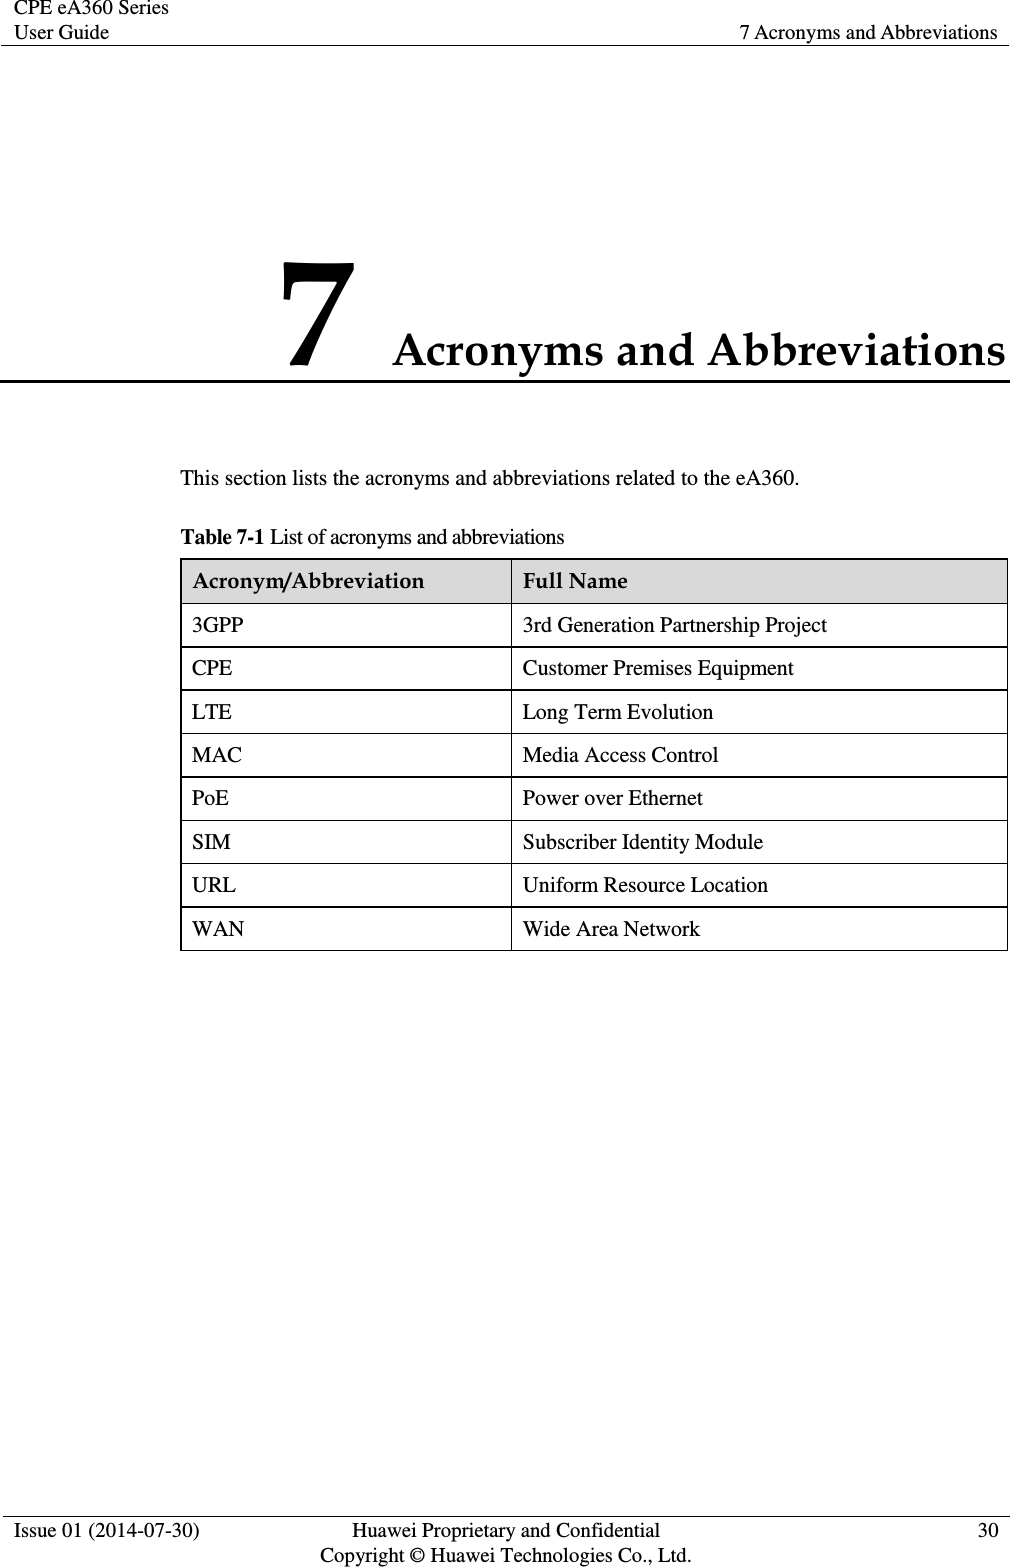 CPE eA360 Series User Guide 7 Acronyms and Abbreviations  Issue 01 (2014-07-30) Huawei Proprietary and Confidential                                     Copyright © Huawei Technologies Co., Ltd. 30  7 Acronyms and Abbreviations This section lists the acronyms and abbreviations related to the eA360. Table 7-1 List of acronyms and abbreviations Acronym/Abbreviation Full Name 3GPP 3rd Generation Partnership Project CPE Customer Premises Equipment LTE Long Term Evolution MAC Media Access Control PoE Power over Ethernet SIM Subscriber Identity Module URL Uniform Resource Location WAN Wide Area Network  